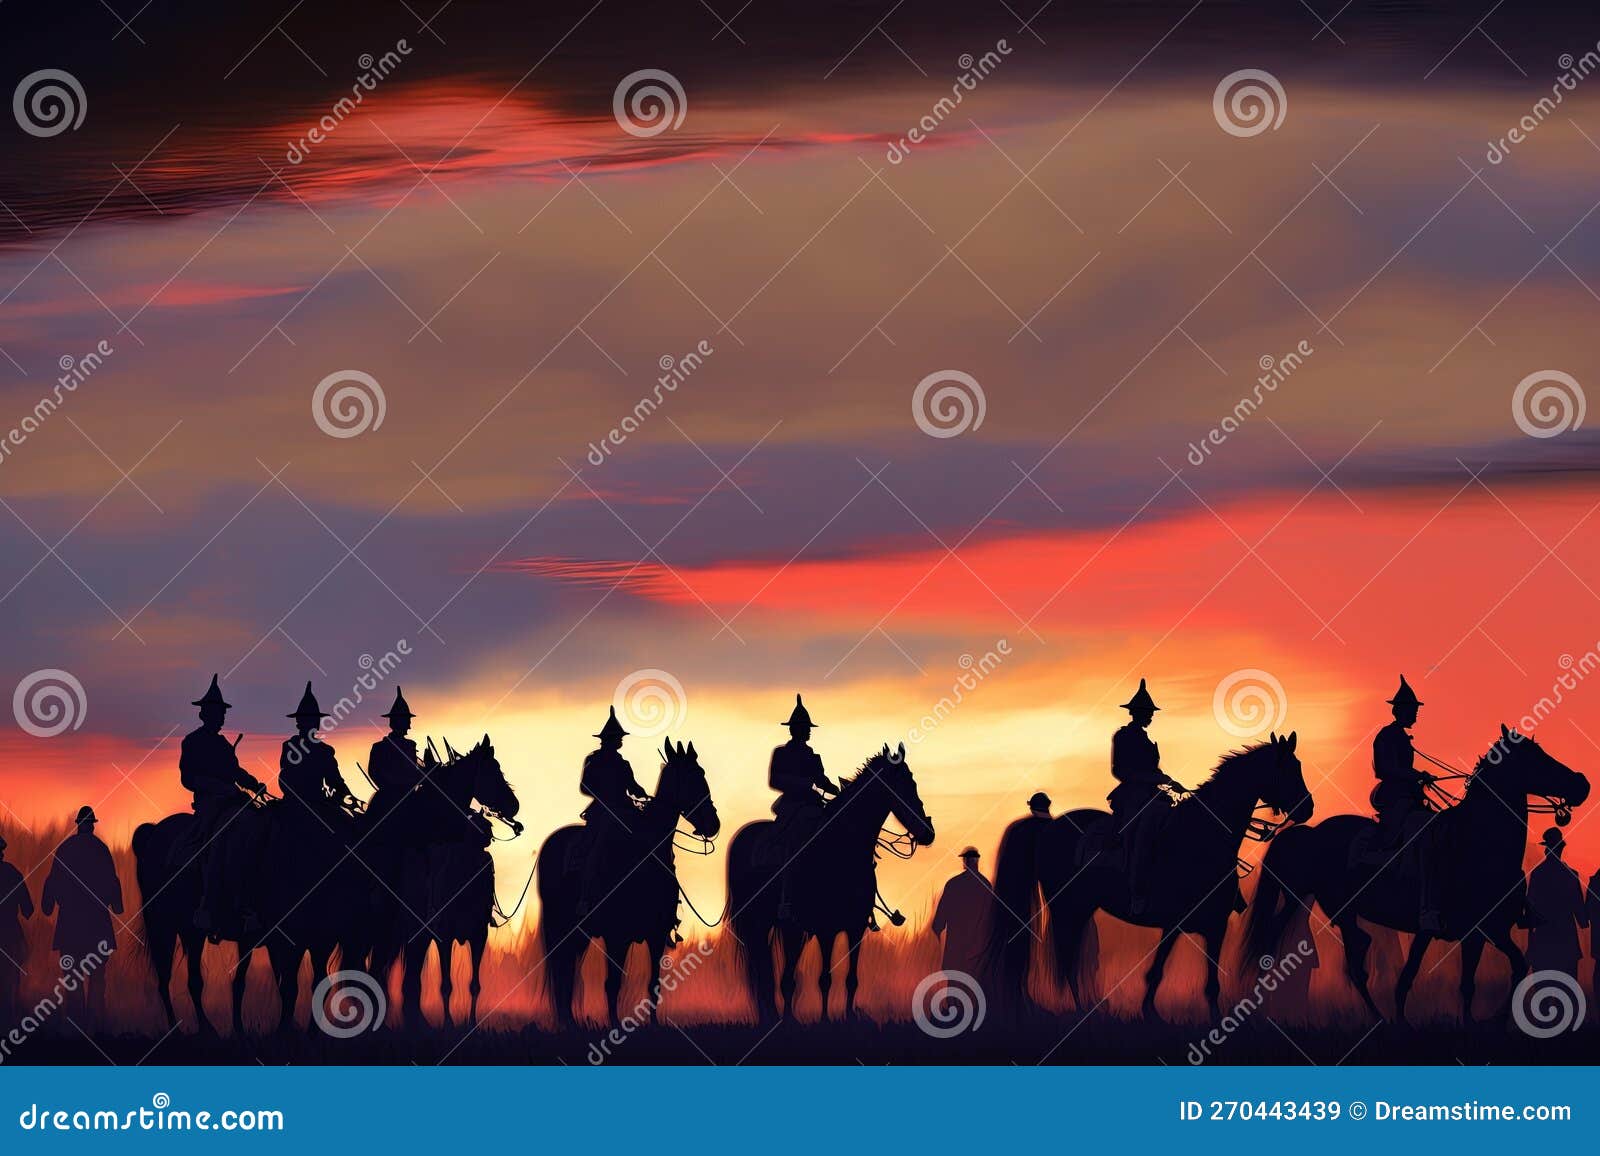 A Group Of People Riding On The Backs Of Horses At Sunset Stock